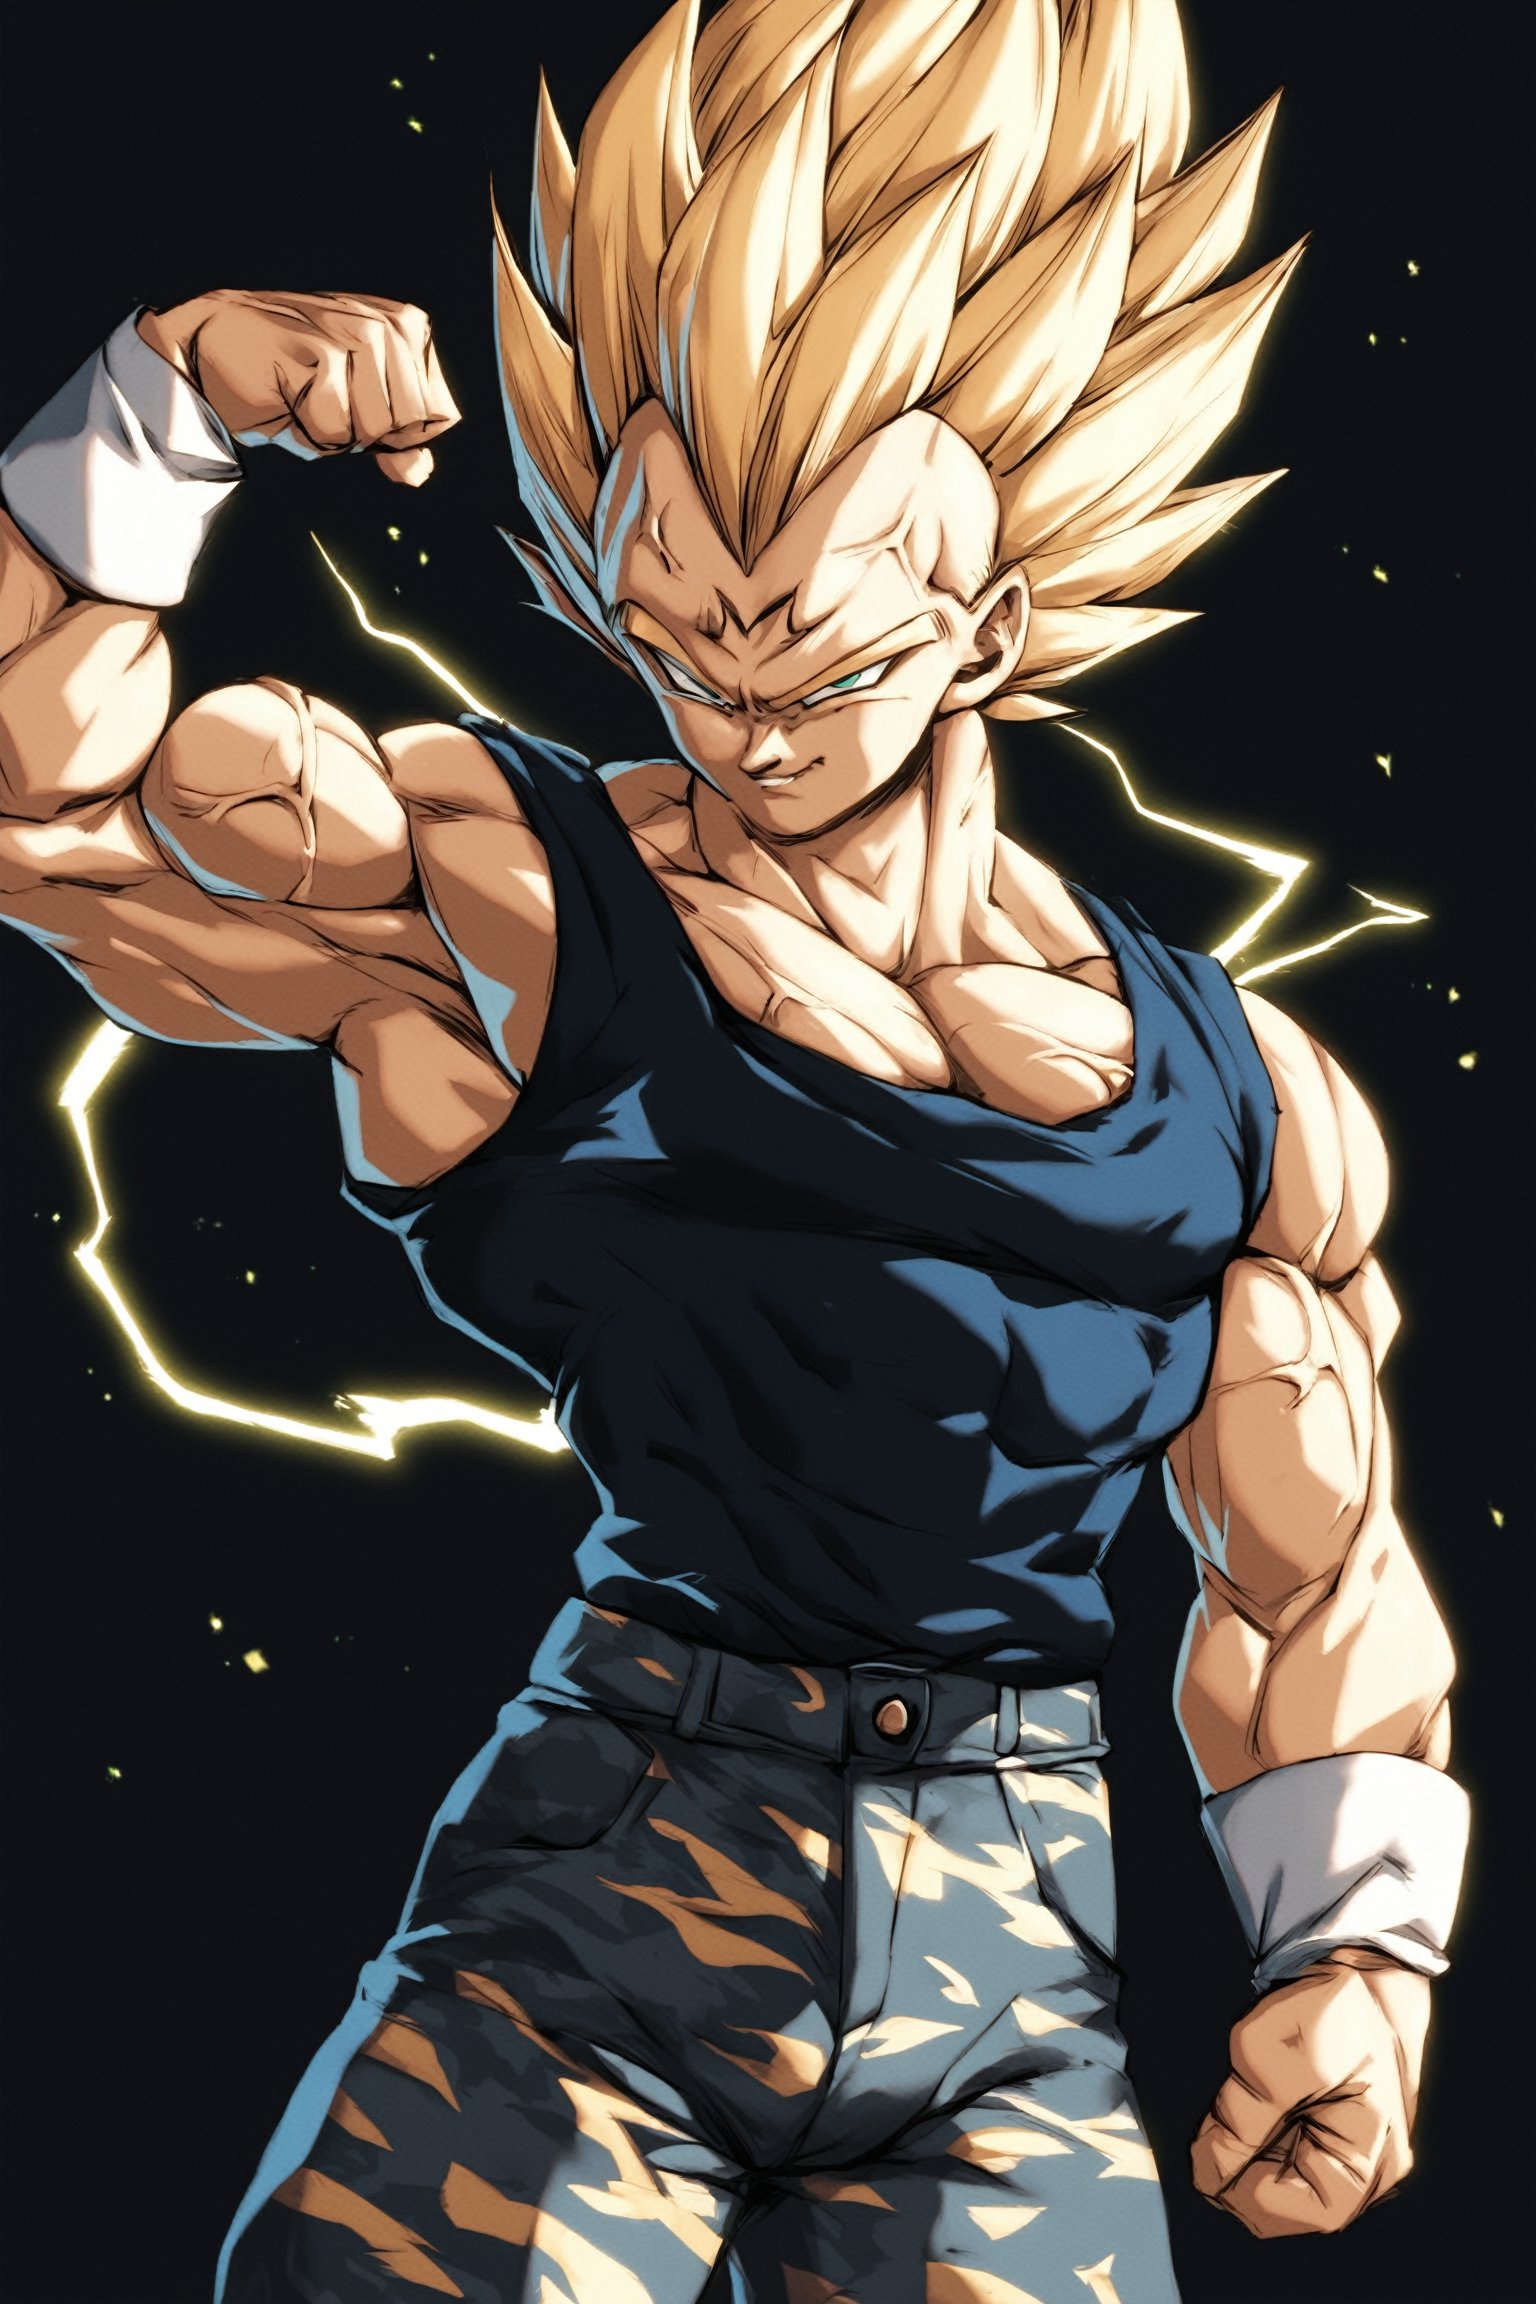 score_9, score_8_up, score_7_up,source_anime, Majin, Vegeta wearing a black tank top and large camouflage pants, flexing to the viewer, veins, black background, yellow lightning around the character, Vintage